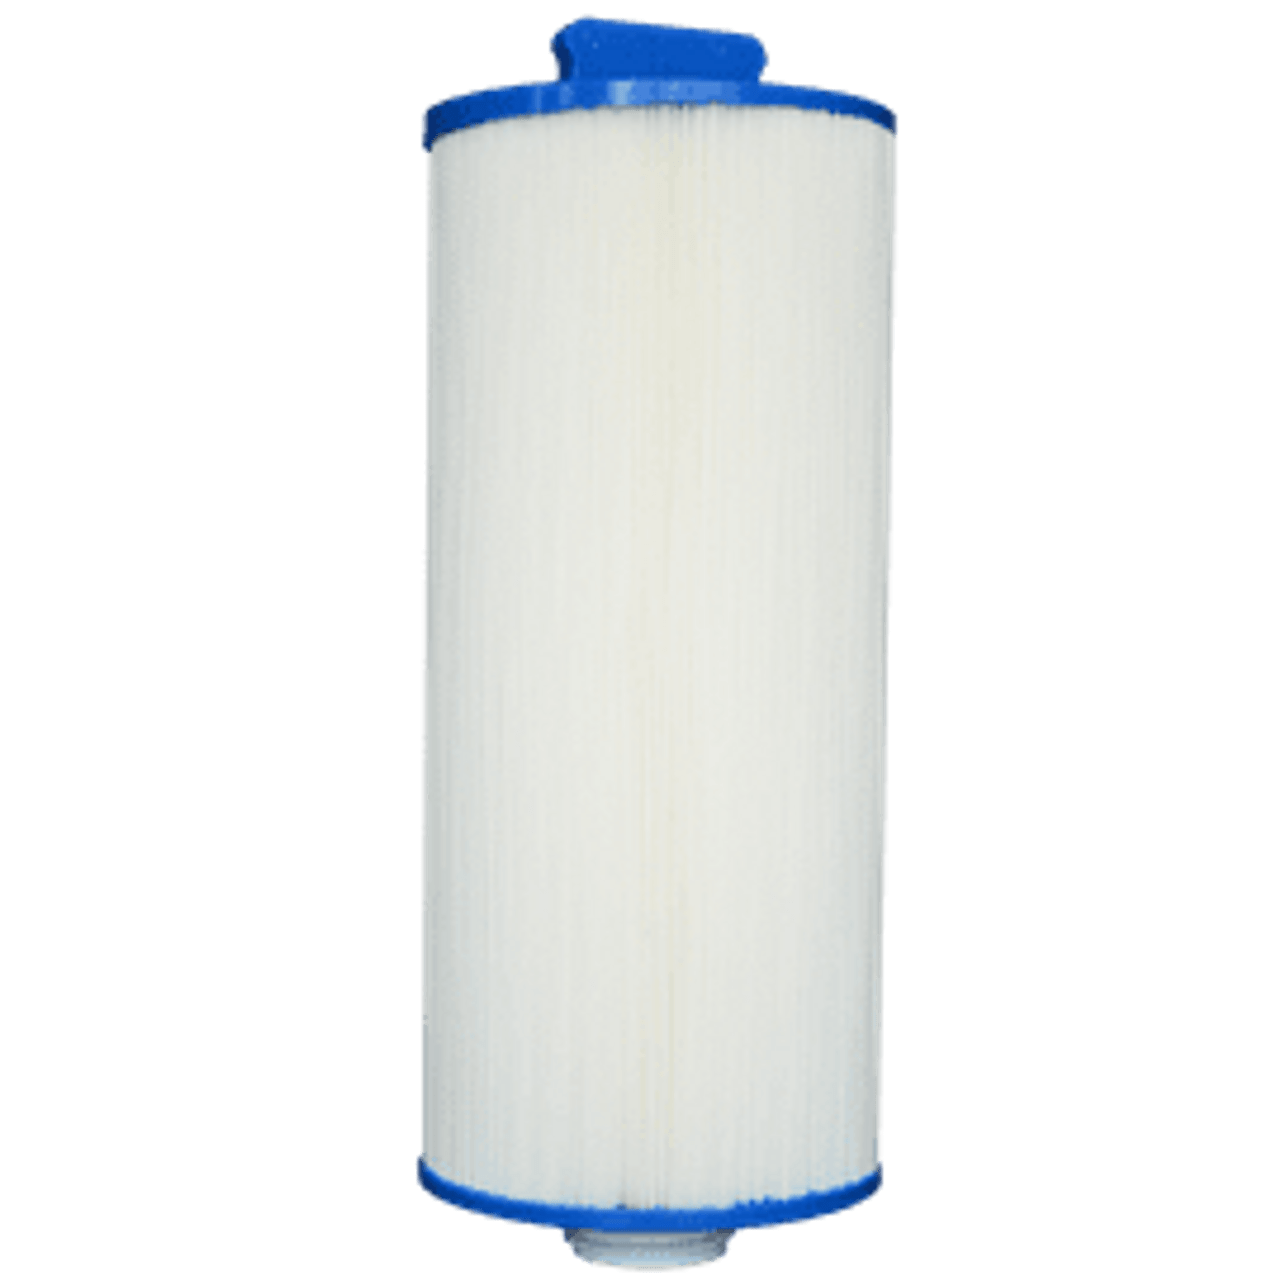 Pleatco PJW60TL-F2S  Filter Cartridge Replaces 6CH-960 and FC-2800